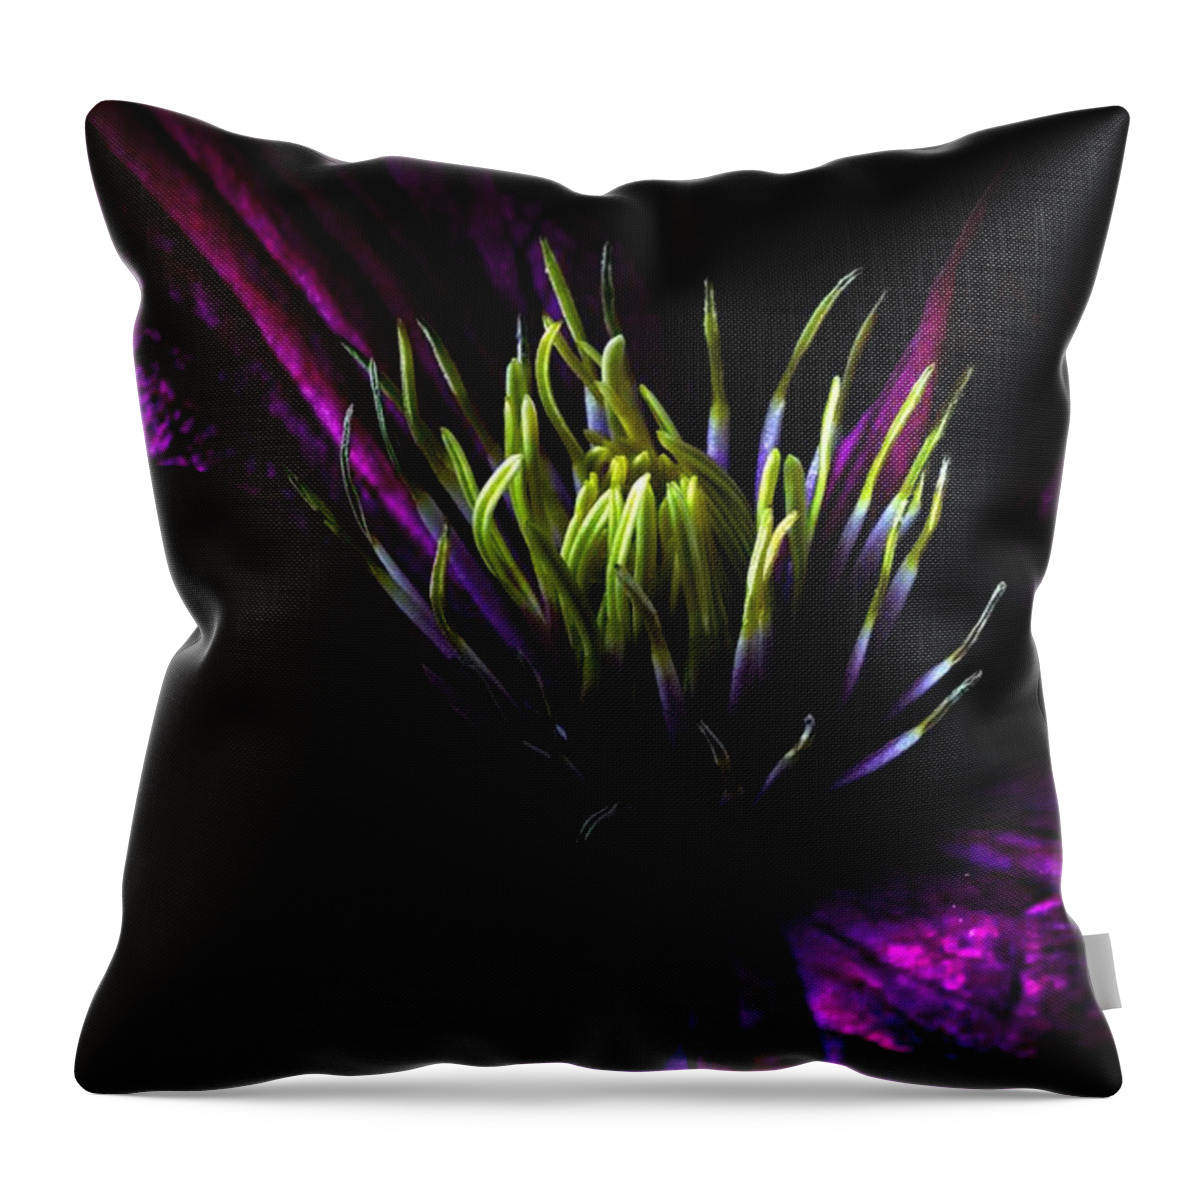 Clematis Throw Pillow featuring the photograph Clematis by Dawn Van Doorn